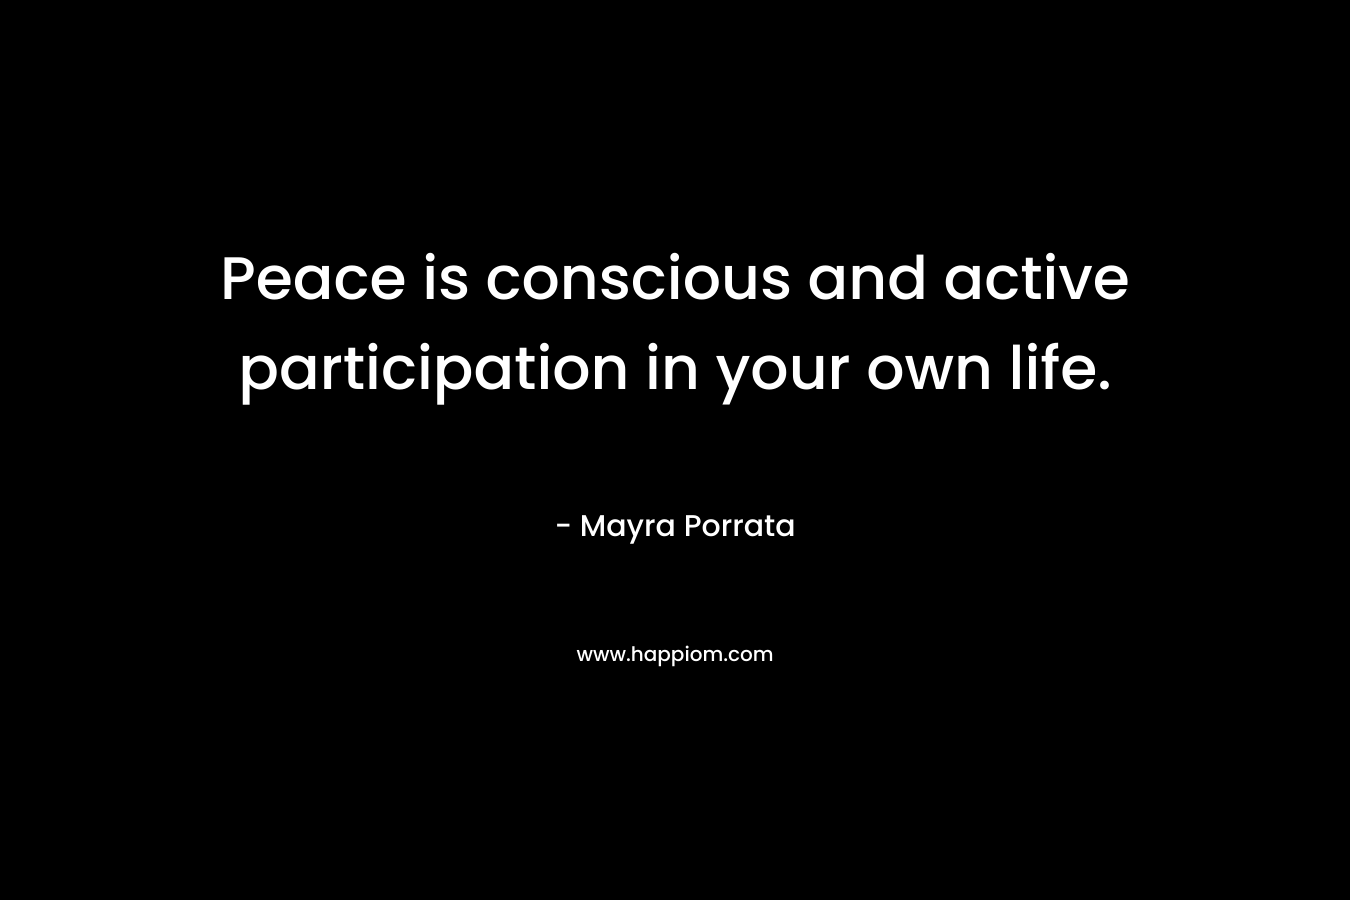 Peace is conscious and active participation in your own life. – Mayra Porrata